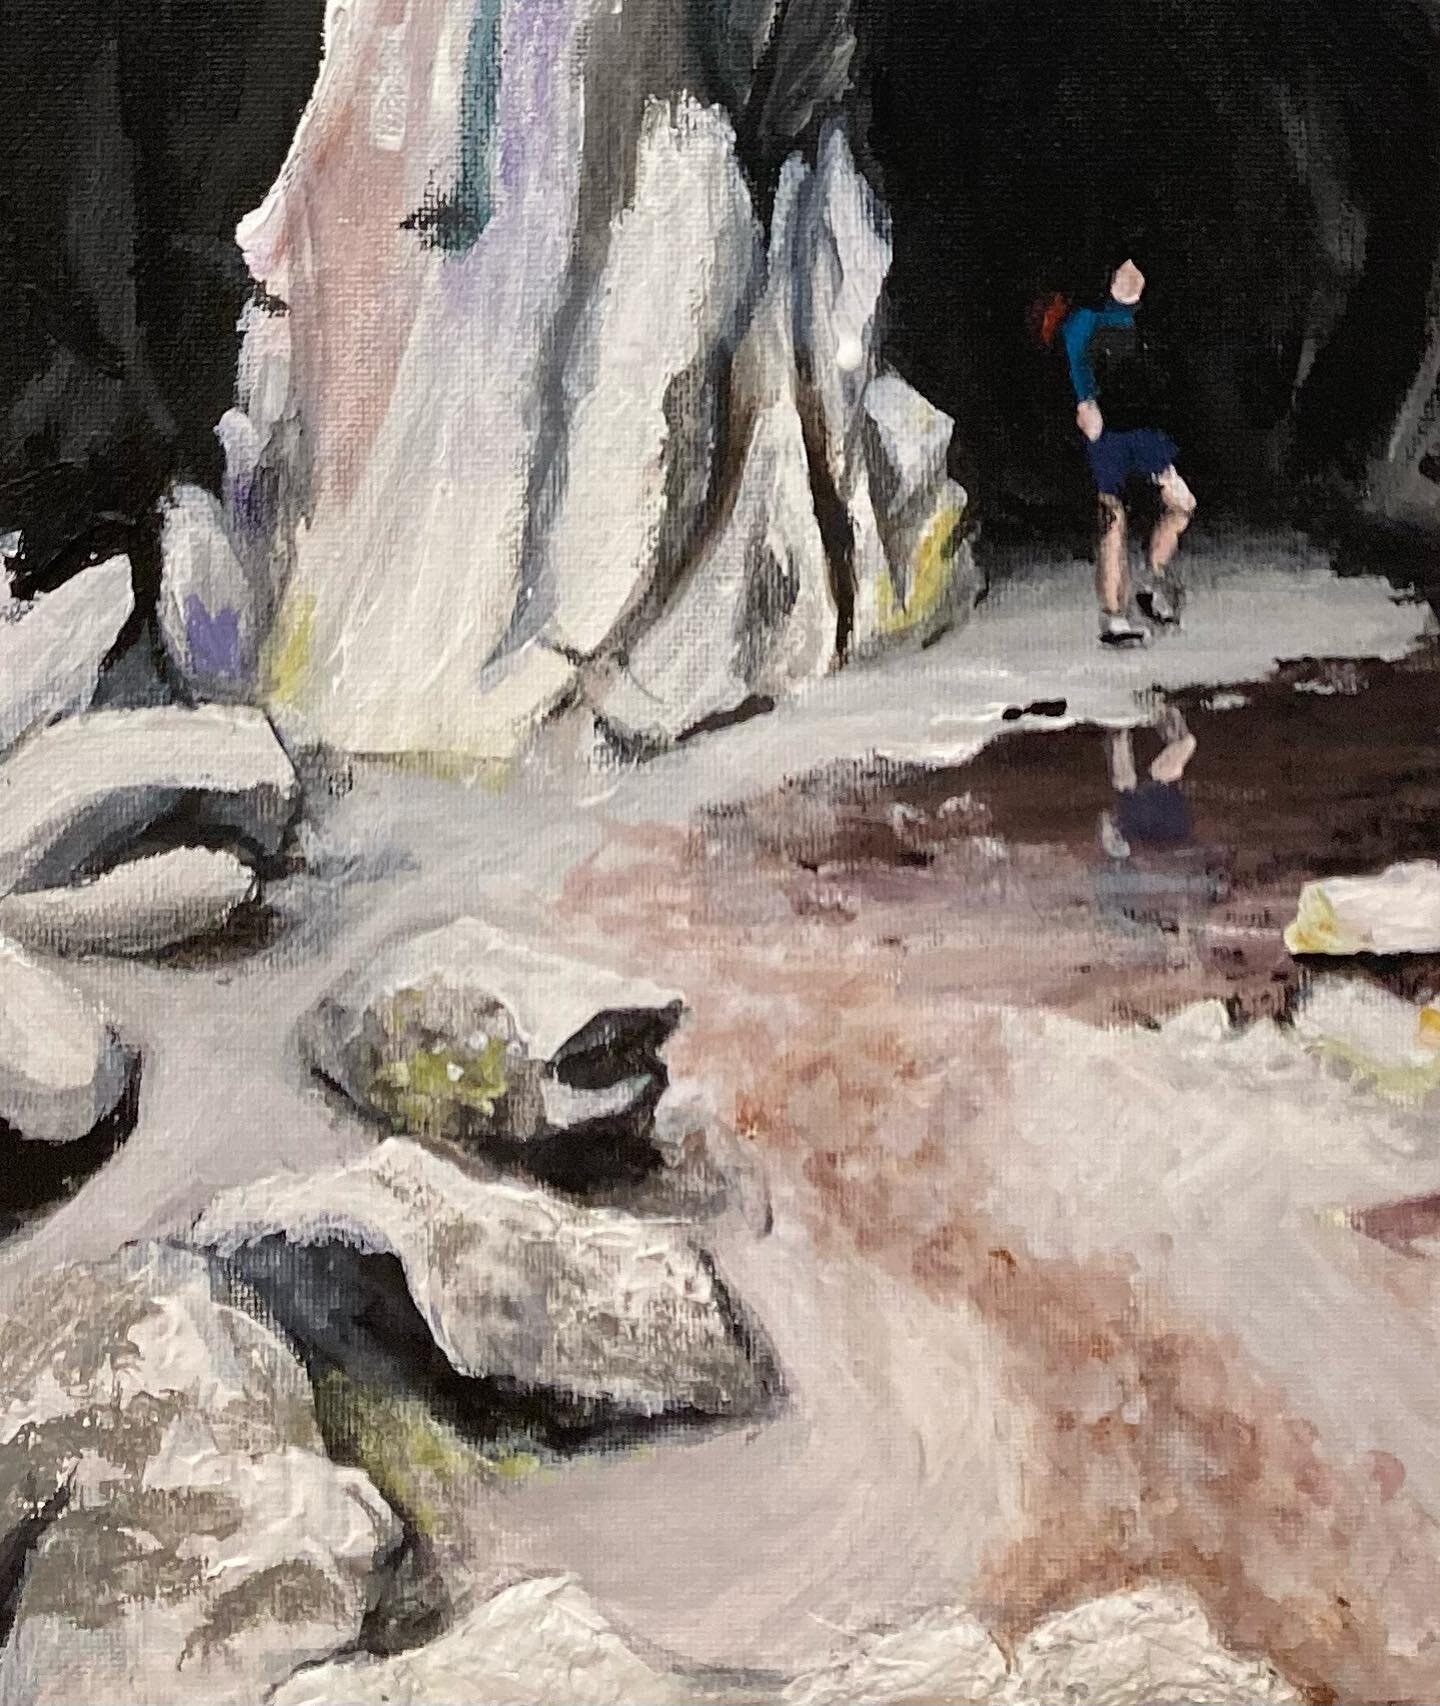 Cathedral Cave, 
Acrylic on canvas.
Tribute to Heaton Cooper and the ramblers group x

For sale x
.
.
.
.
#painting #landscape #cathedralcave #lakedistrict #mountains #caves #caving #reflection #water #cumbria #lakedistrictnationalpark #lakesistrictu